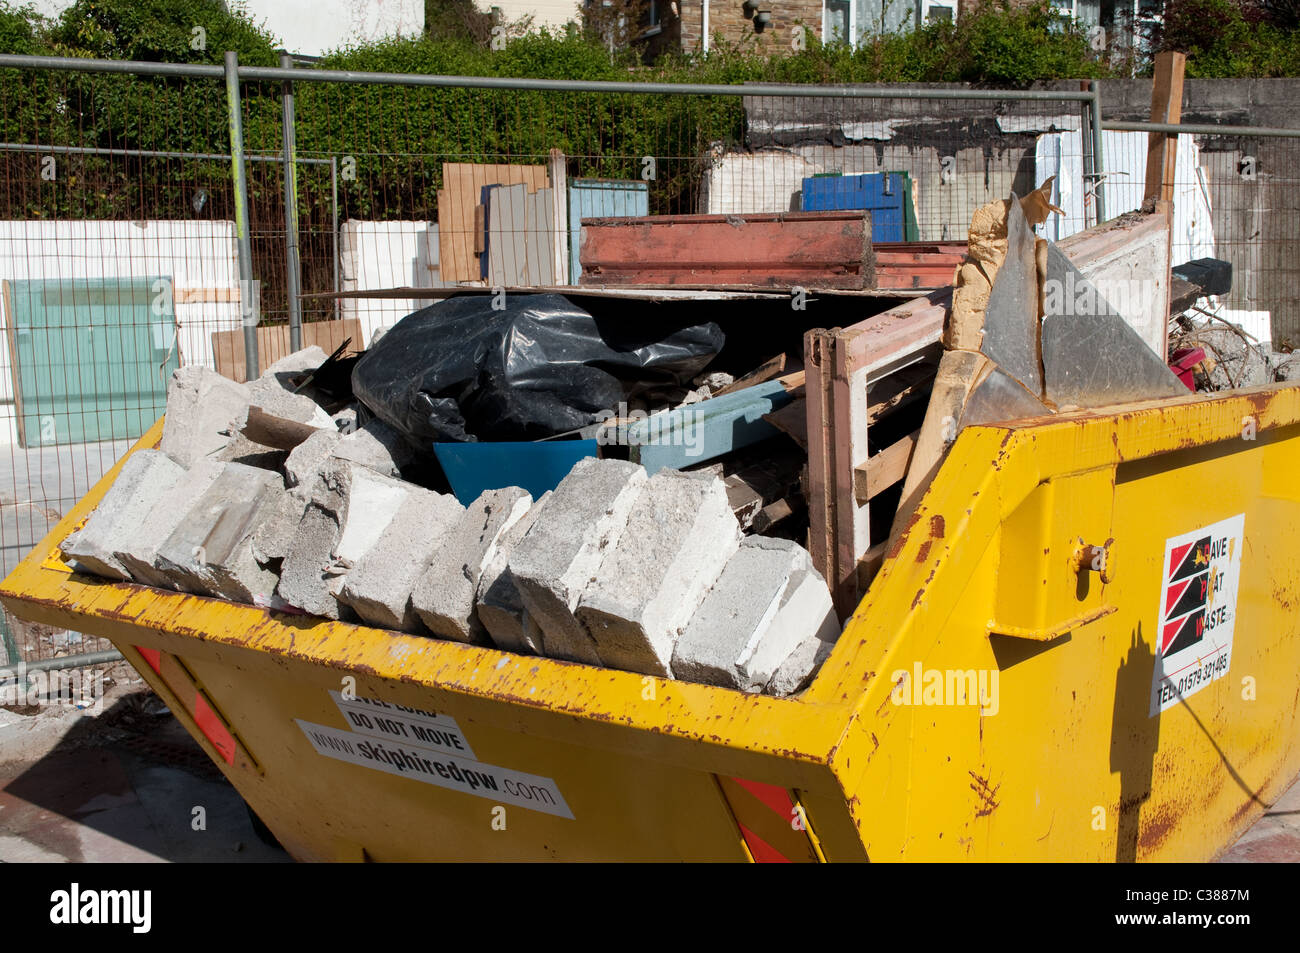 A builders skip full of old building materials Stock Photo